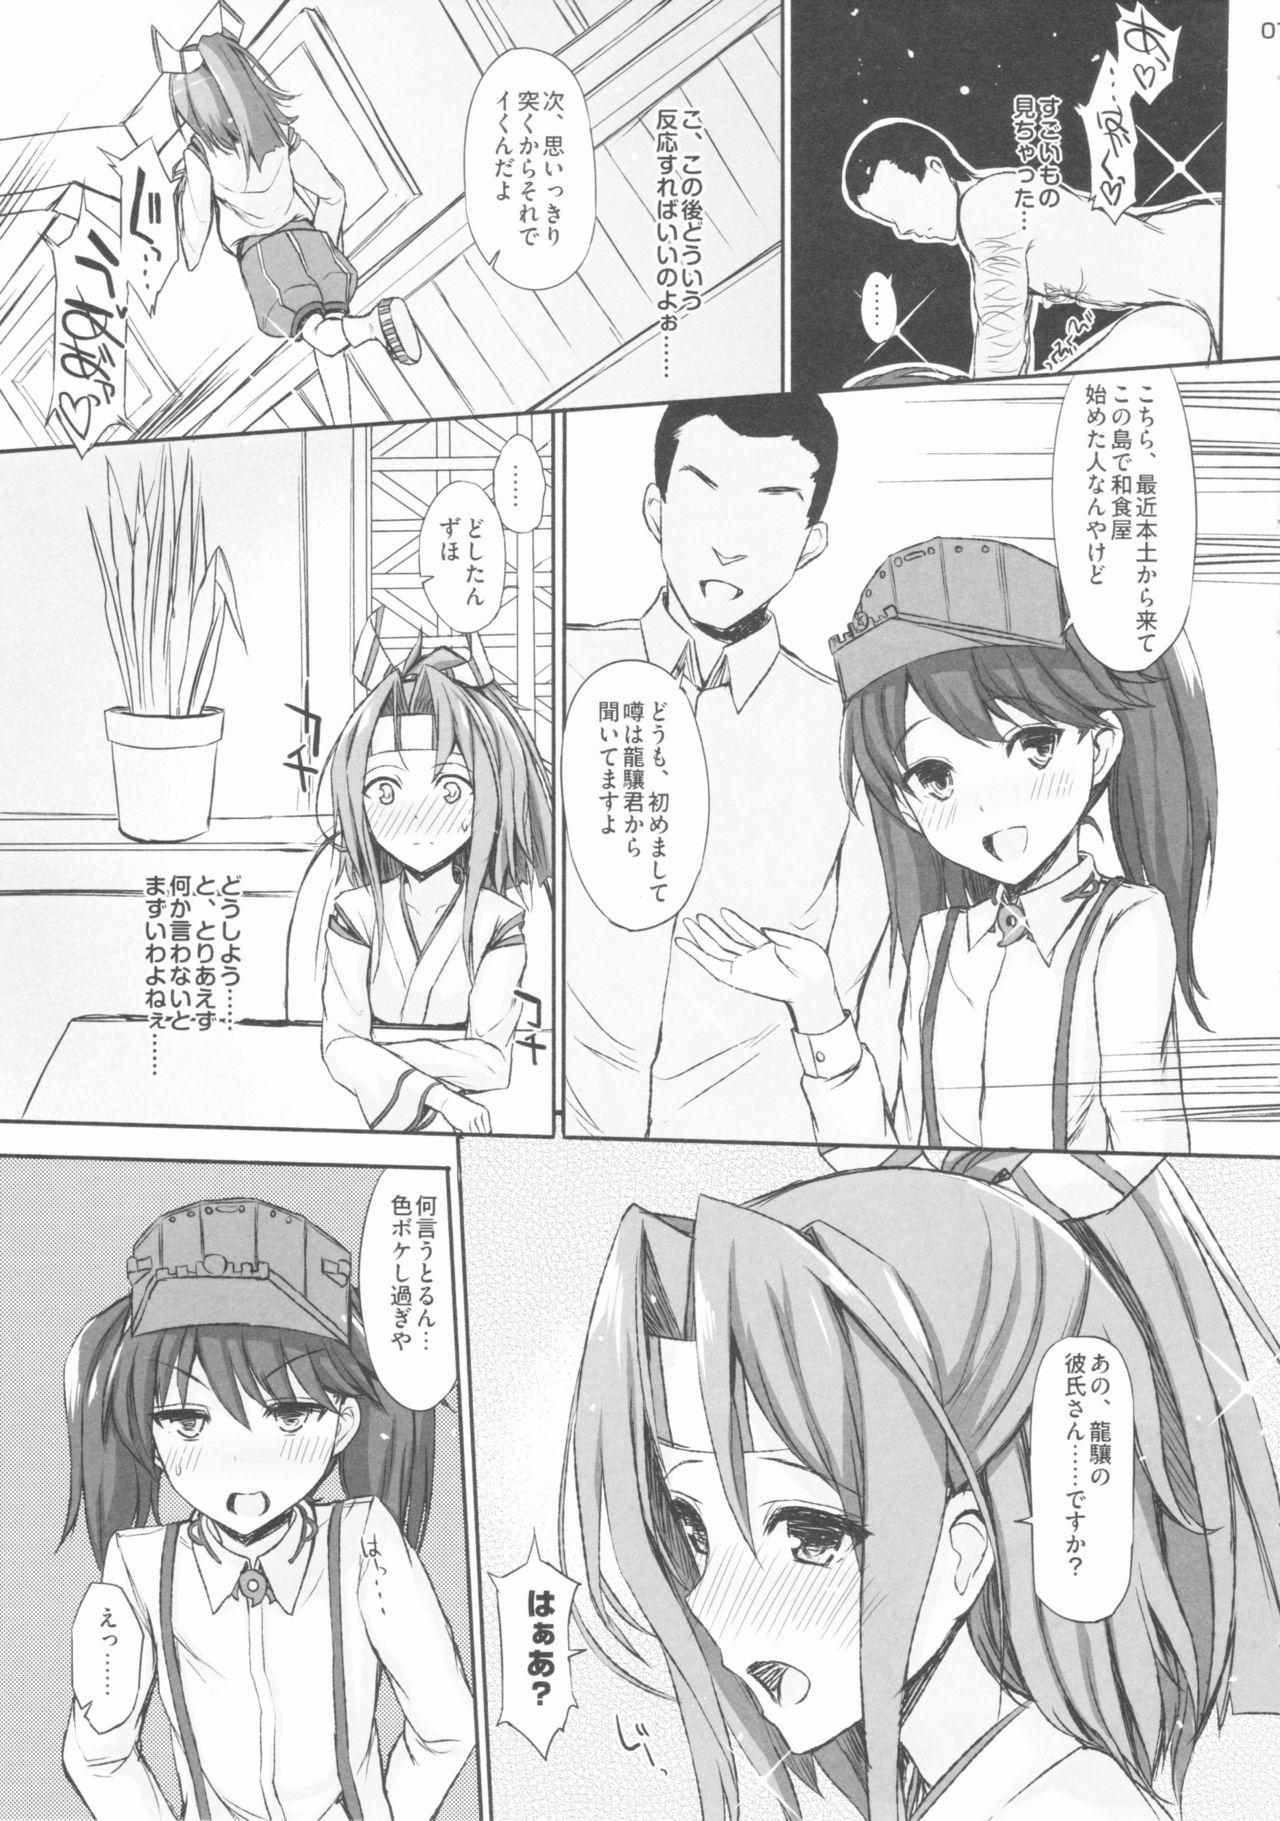 Putas AND THEN NOTHING - Kantai collection Rub - Page 6